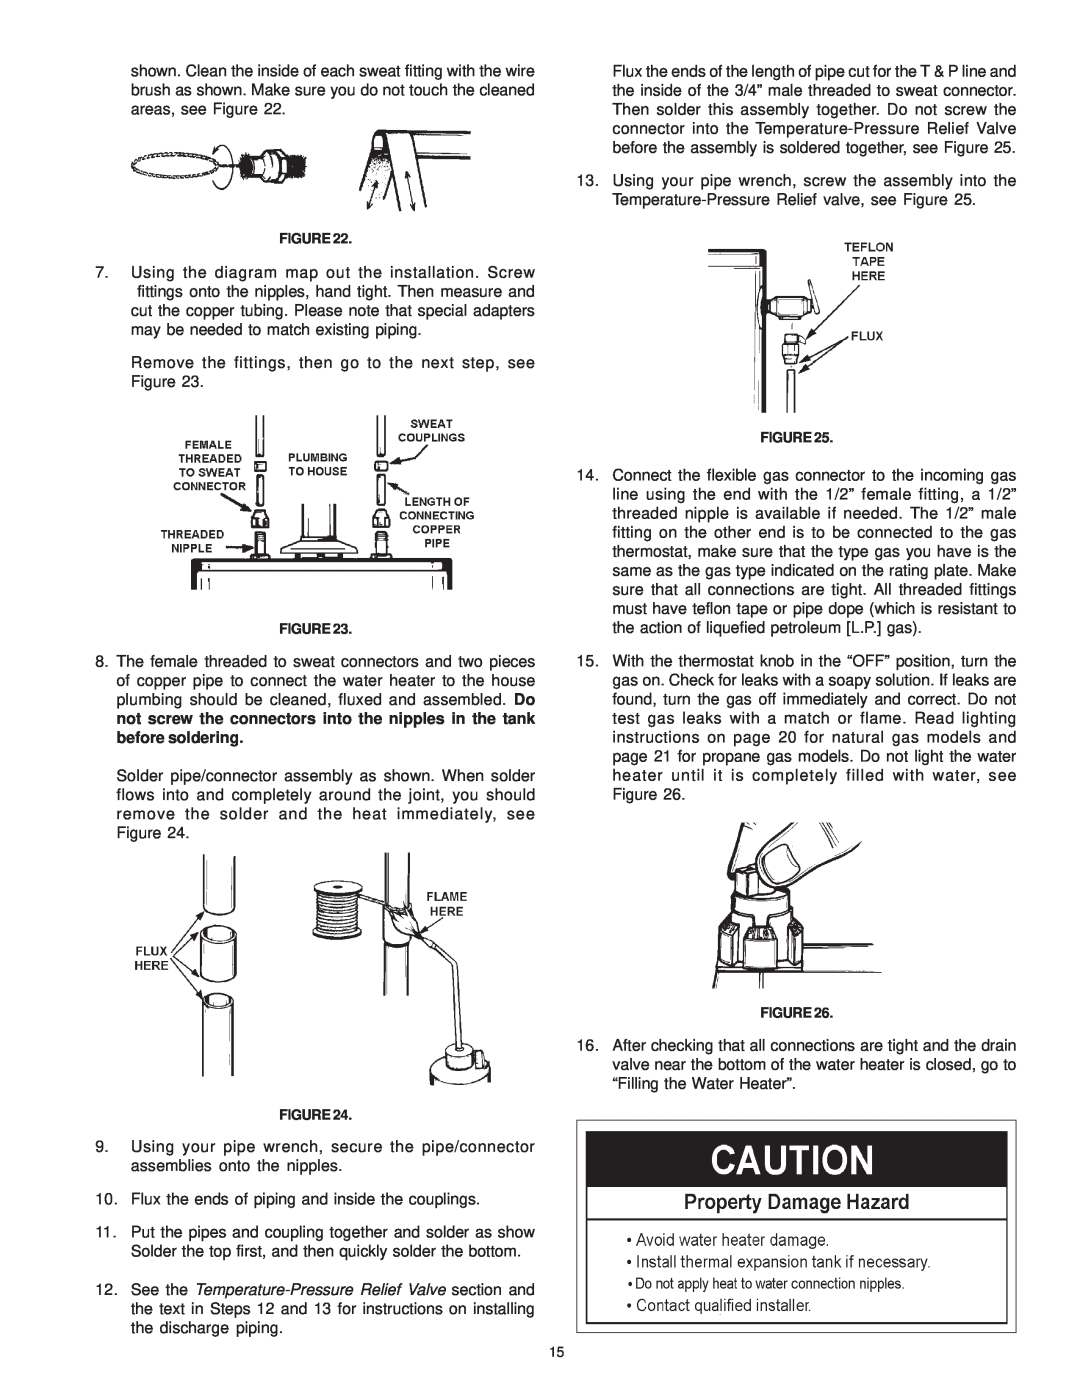 Reliance Water Heaters 606 Series, 196296-001 instruction manual 